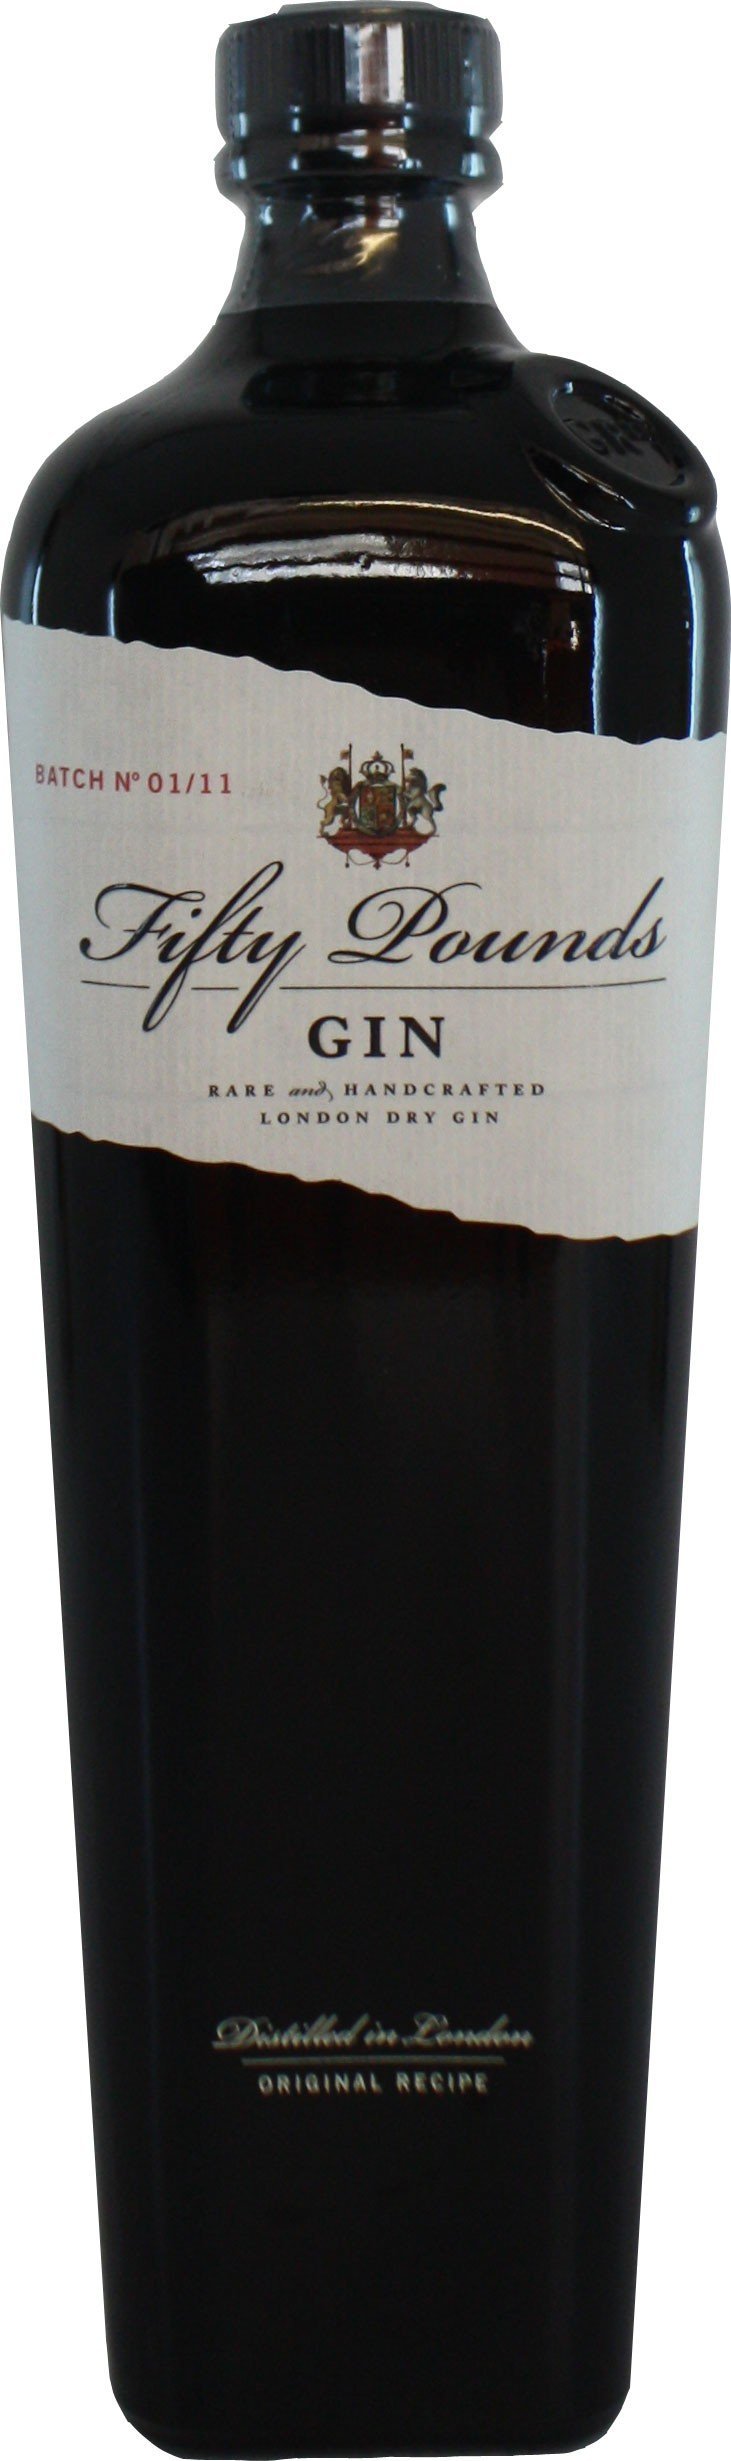 Fifty Pounds London Dry Gin 750ml-0